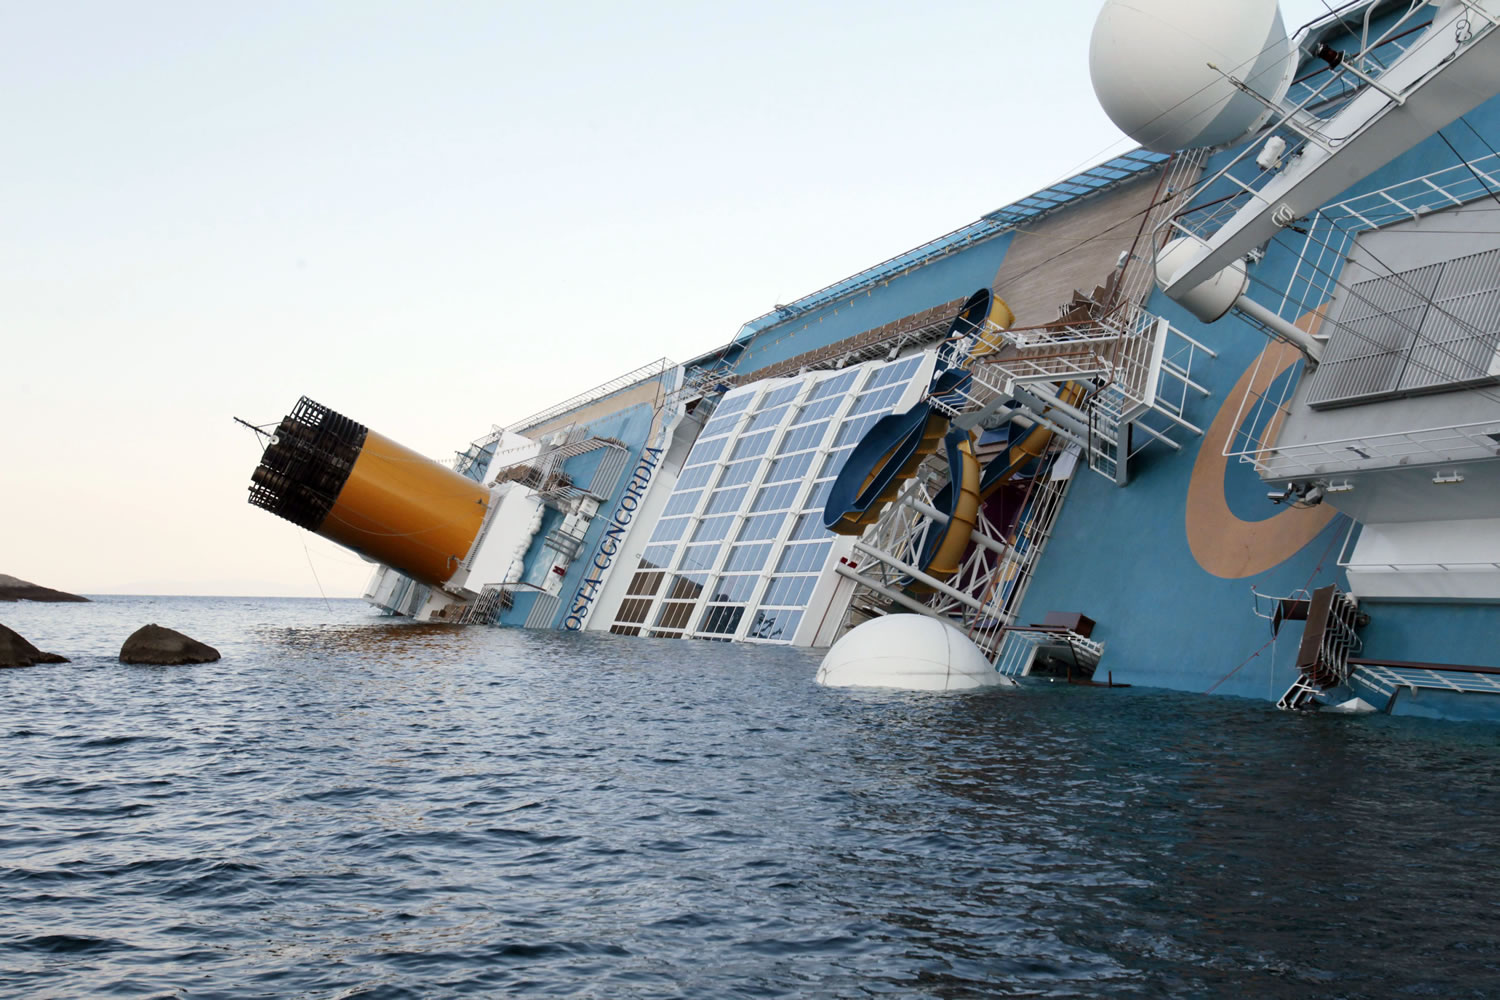 The luxury cruise ship Costa Concordia leans on its side after running aground the tiny Tuscan island of Giglio, Italy, on Saturday.